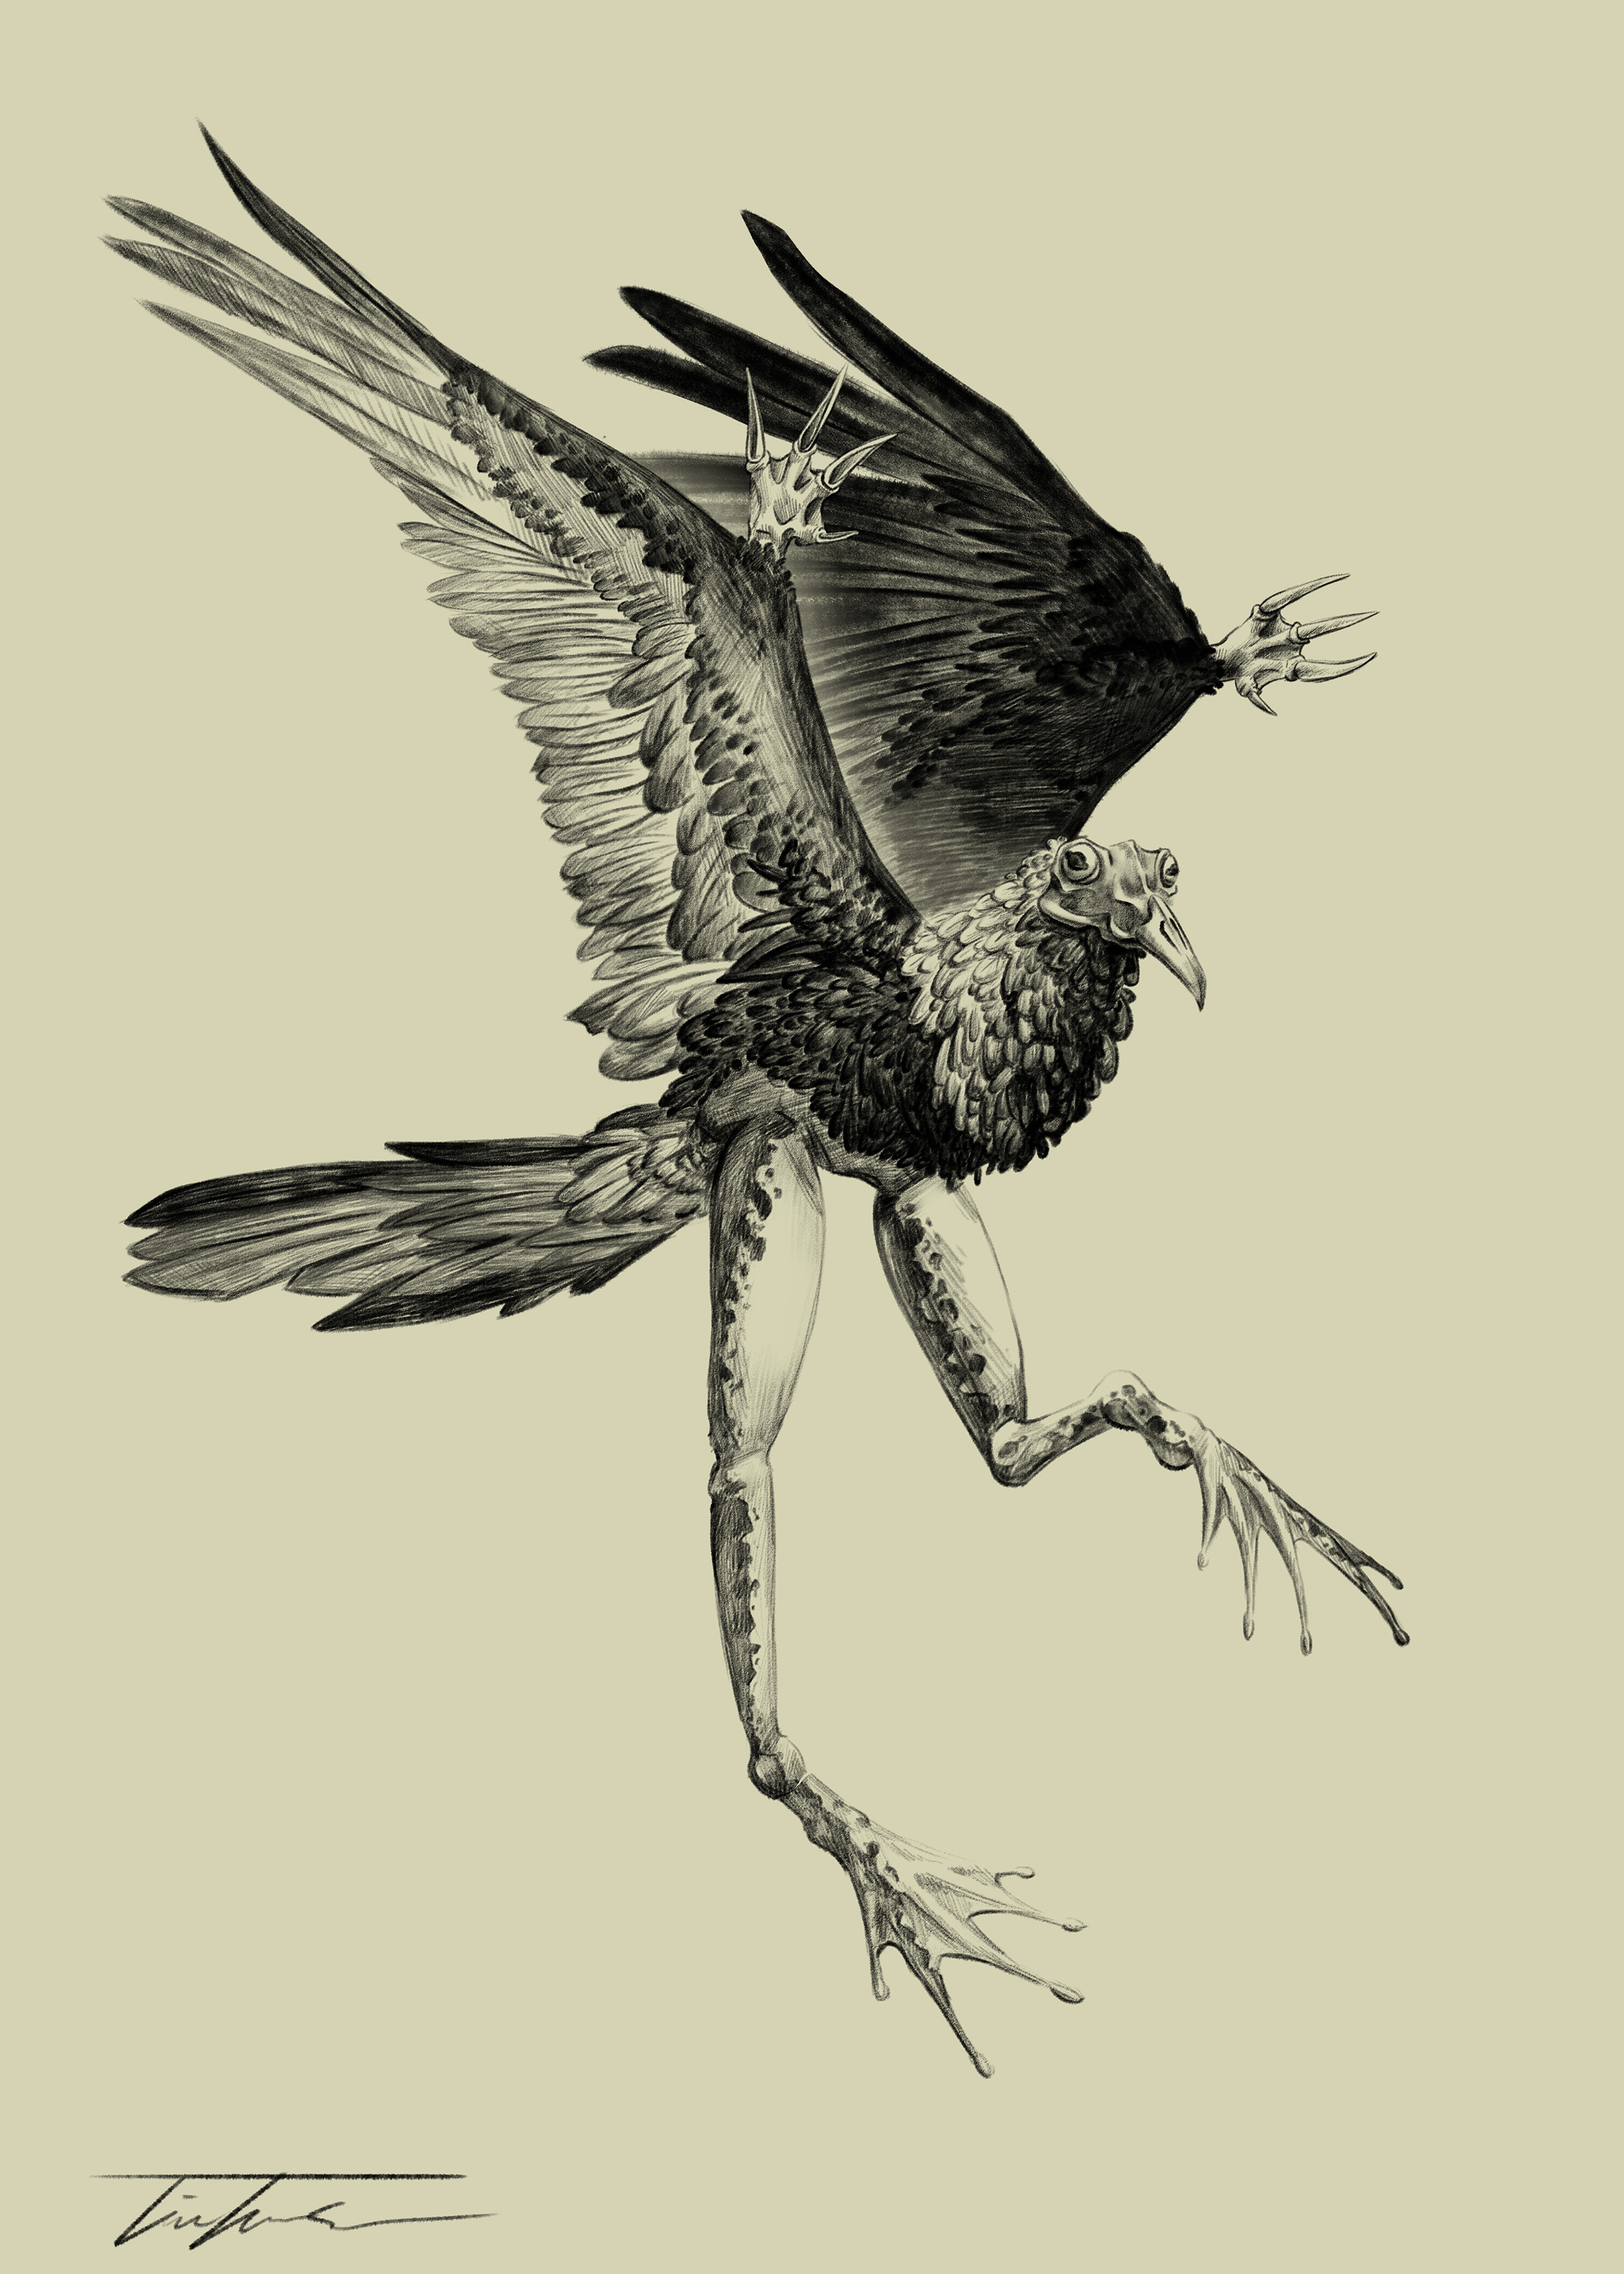  / Pond Hopper Scientific Drawing, Creature Design Prompt for Concept 1 Class. Created in Photoshop